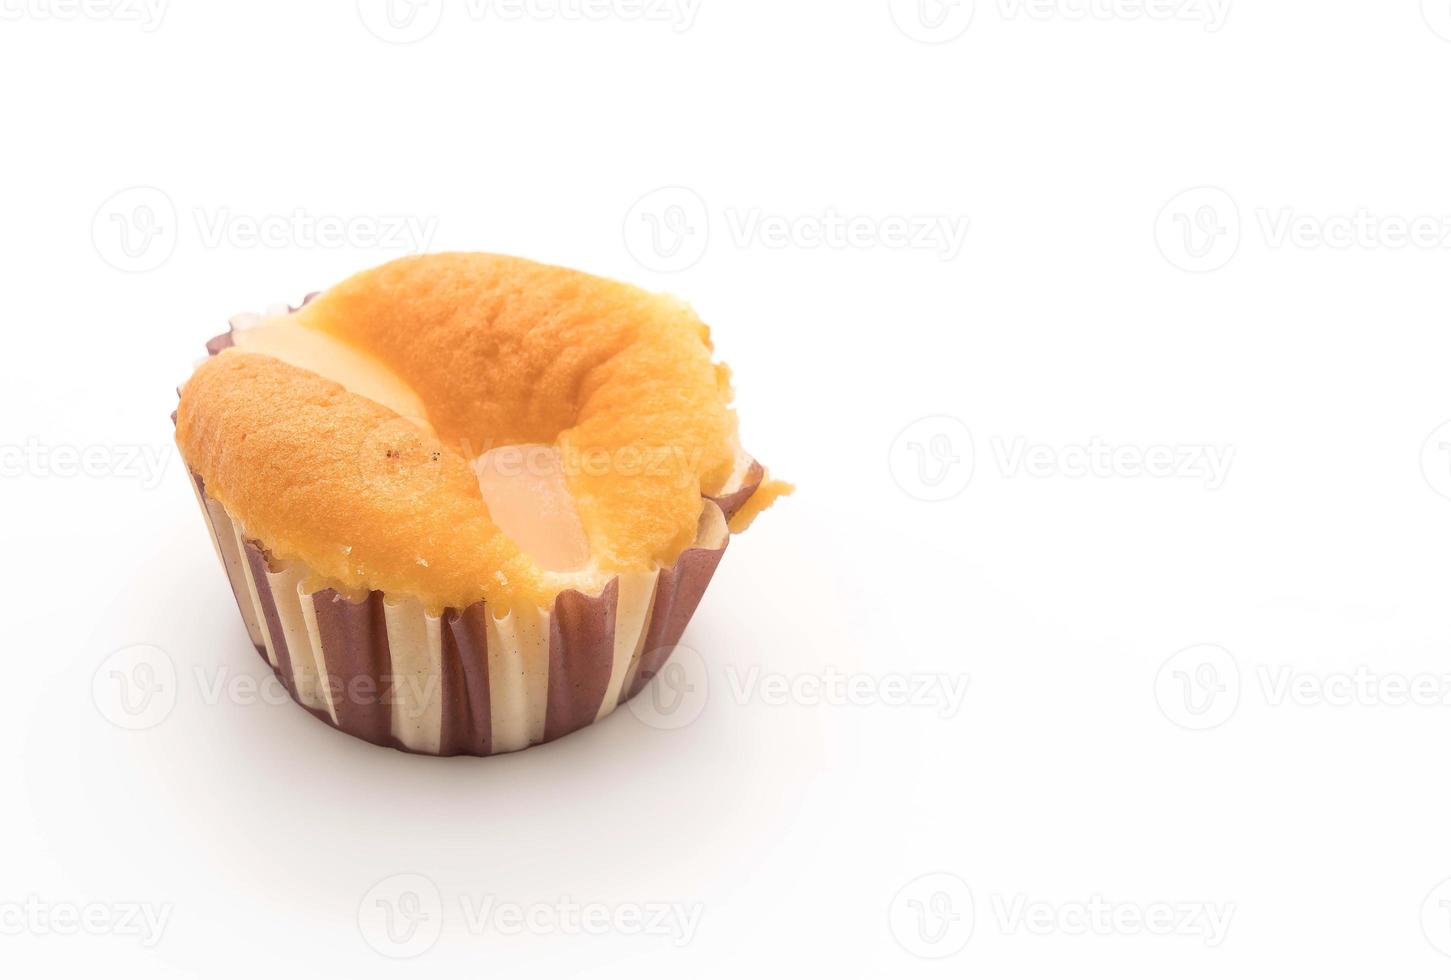 Vanilla cupcake with fruit on top on white background photo